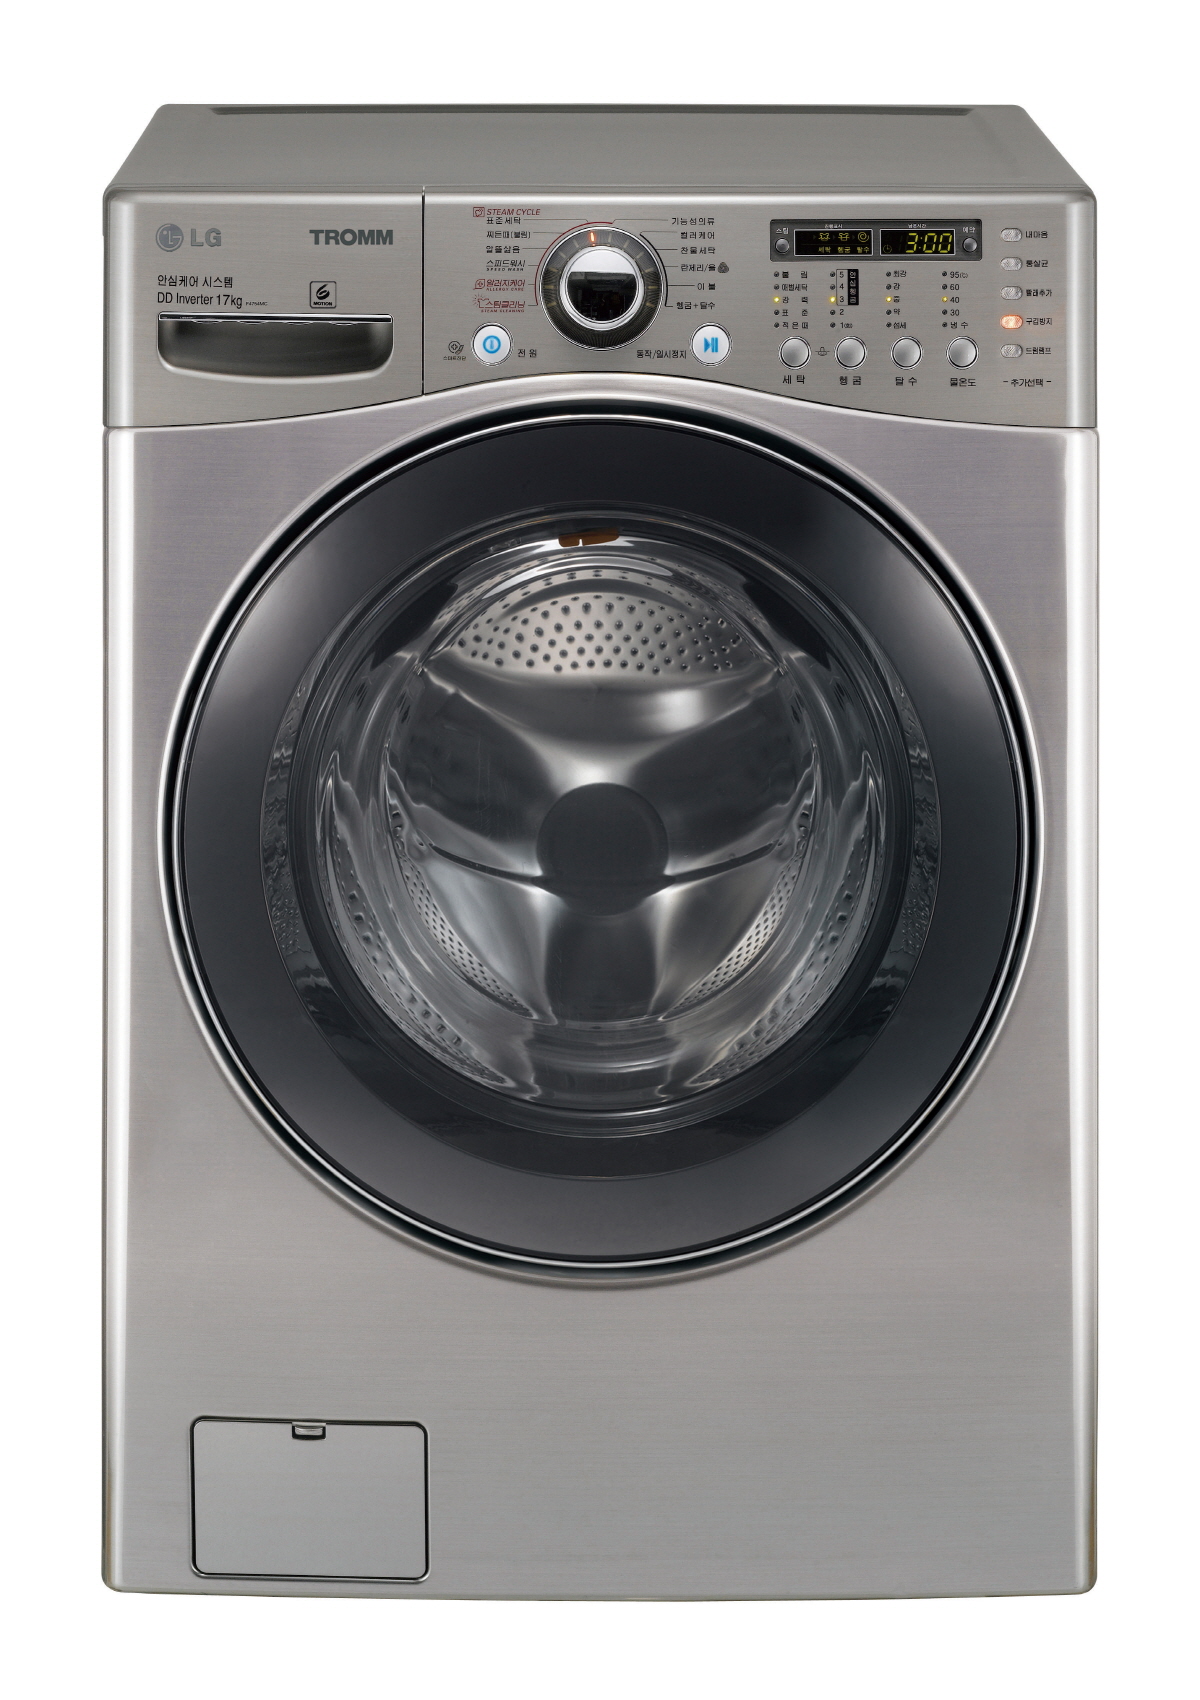 a compact washing machine with a built in front load